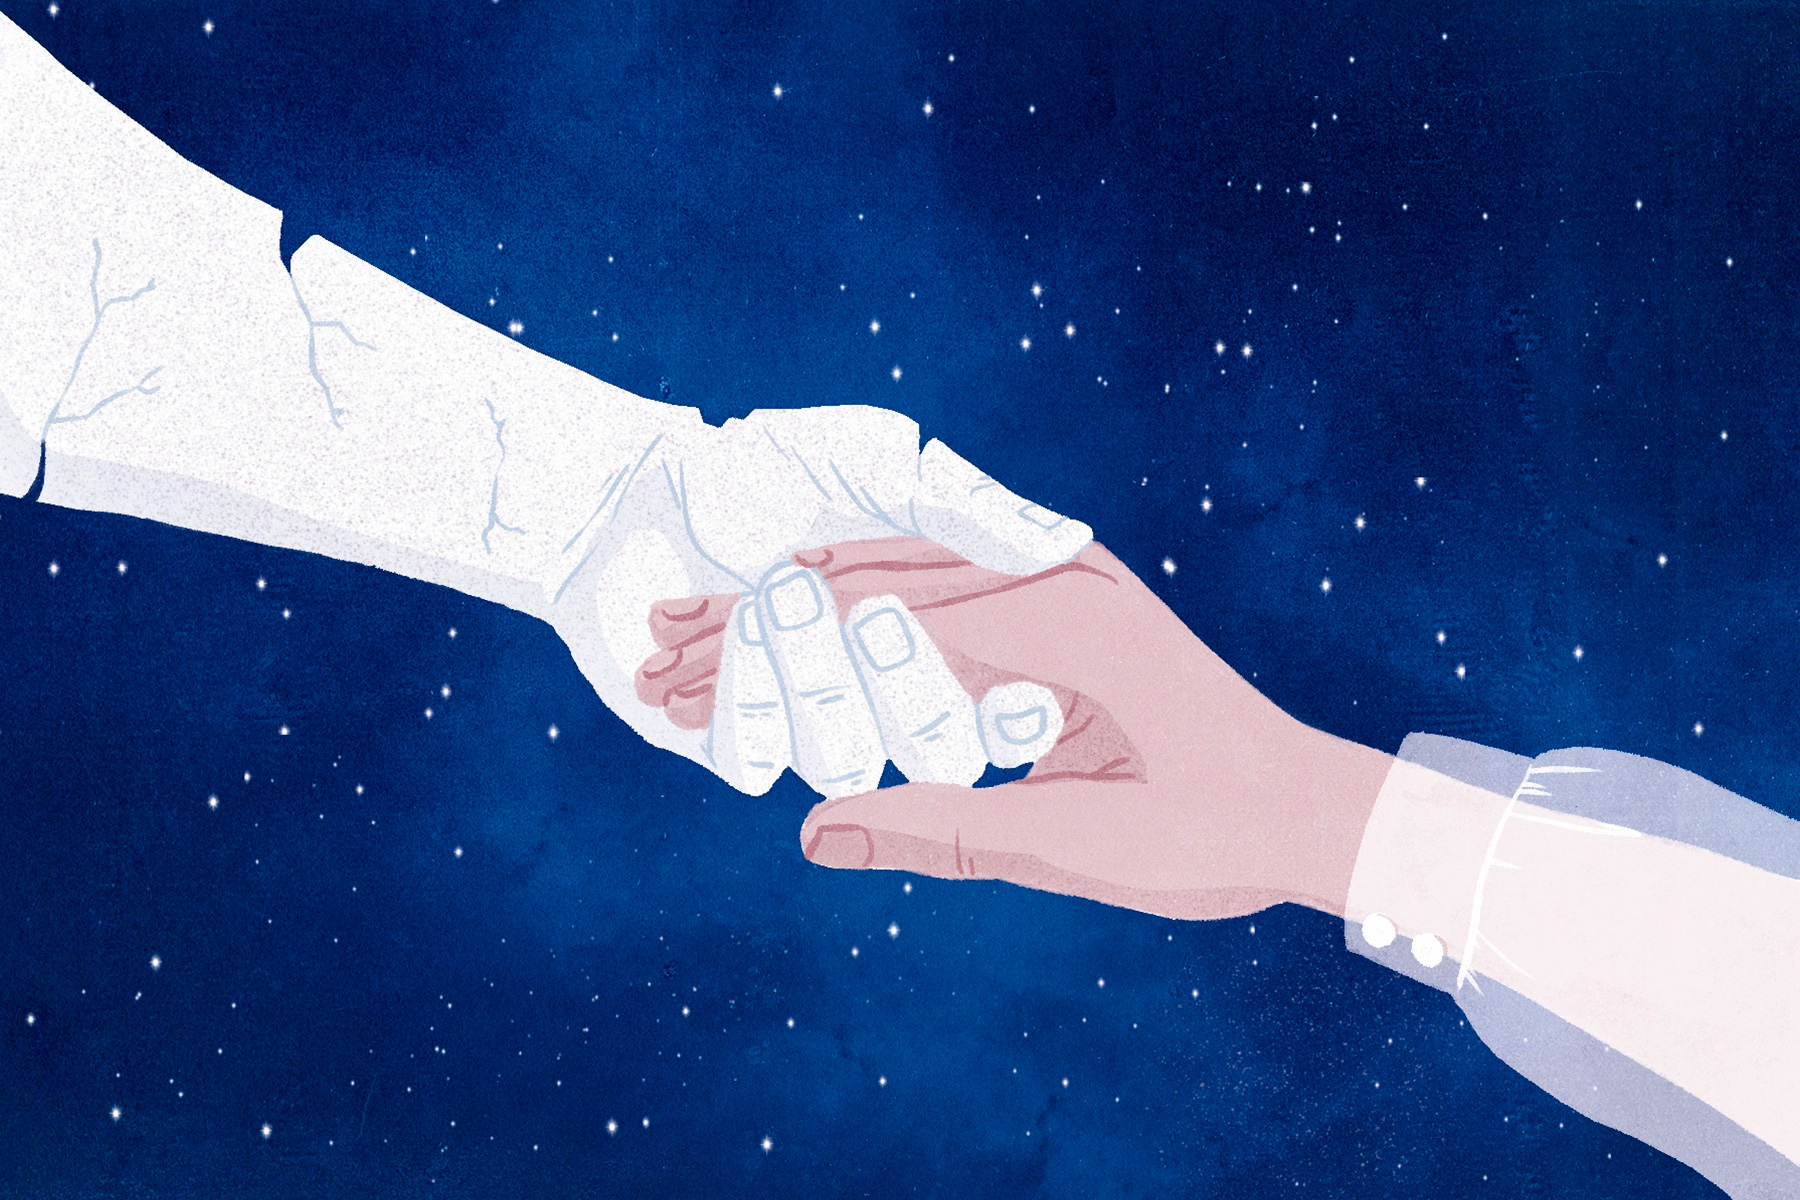 An illustration of a stone hand reaching a human hand under a starry sky against a beach backdrop